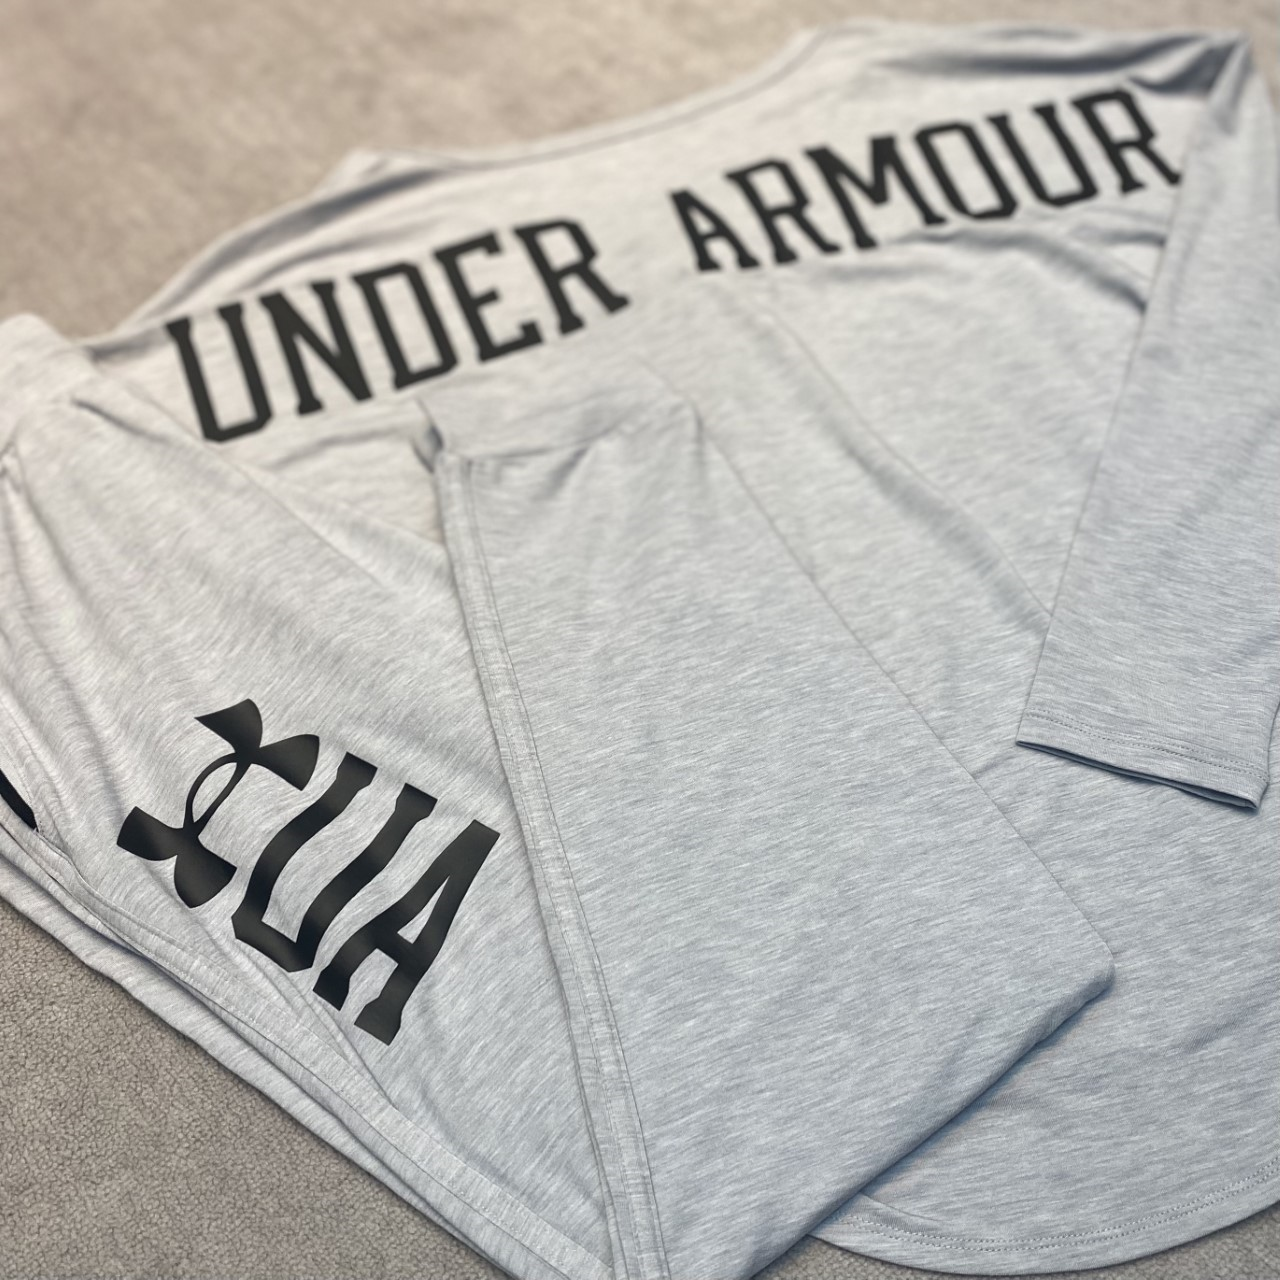 Women's クリアランス商品紹介 | UNDER ARMOUR BRAND HOUSE 有明